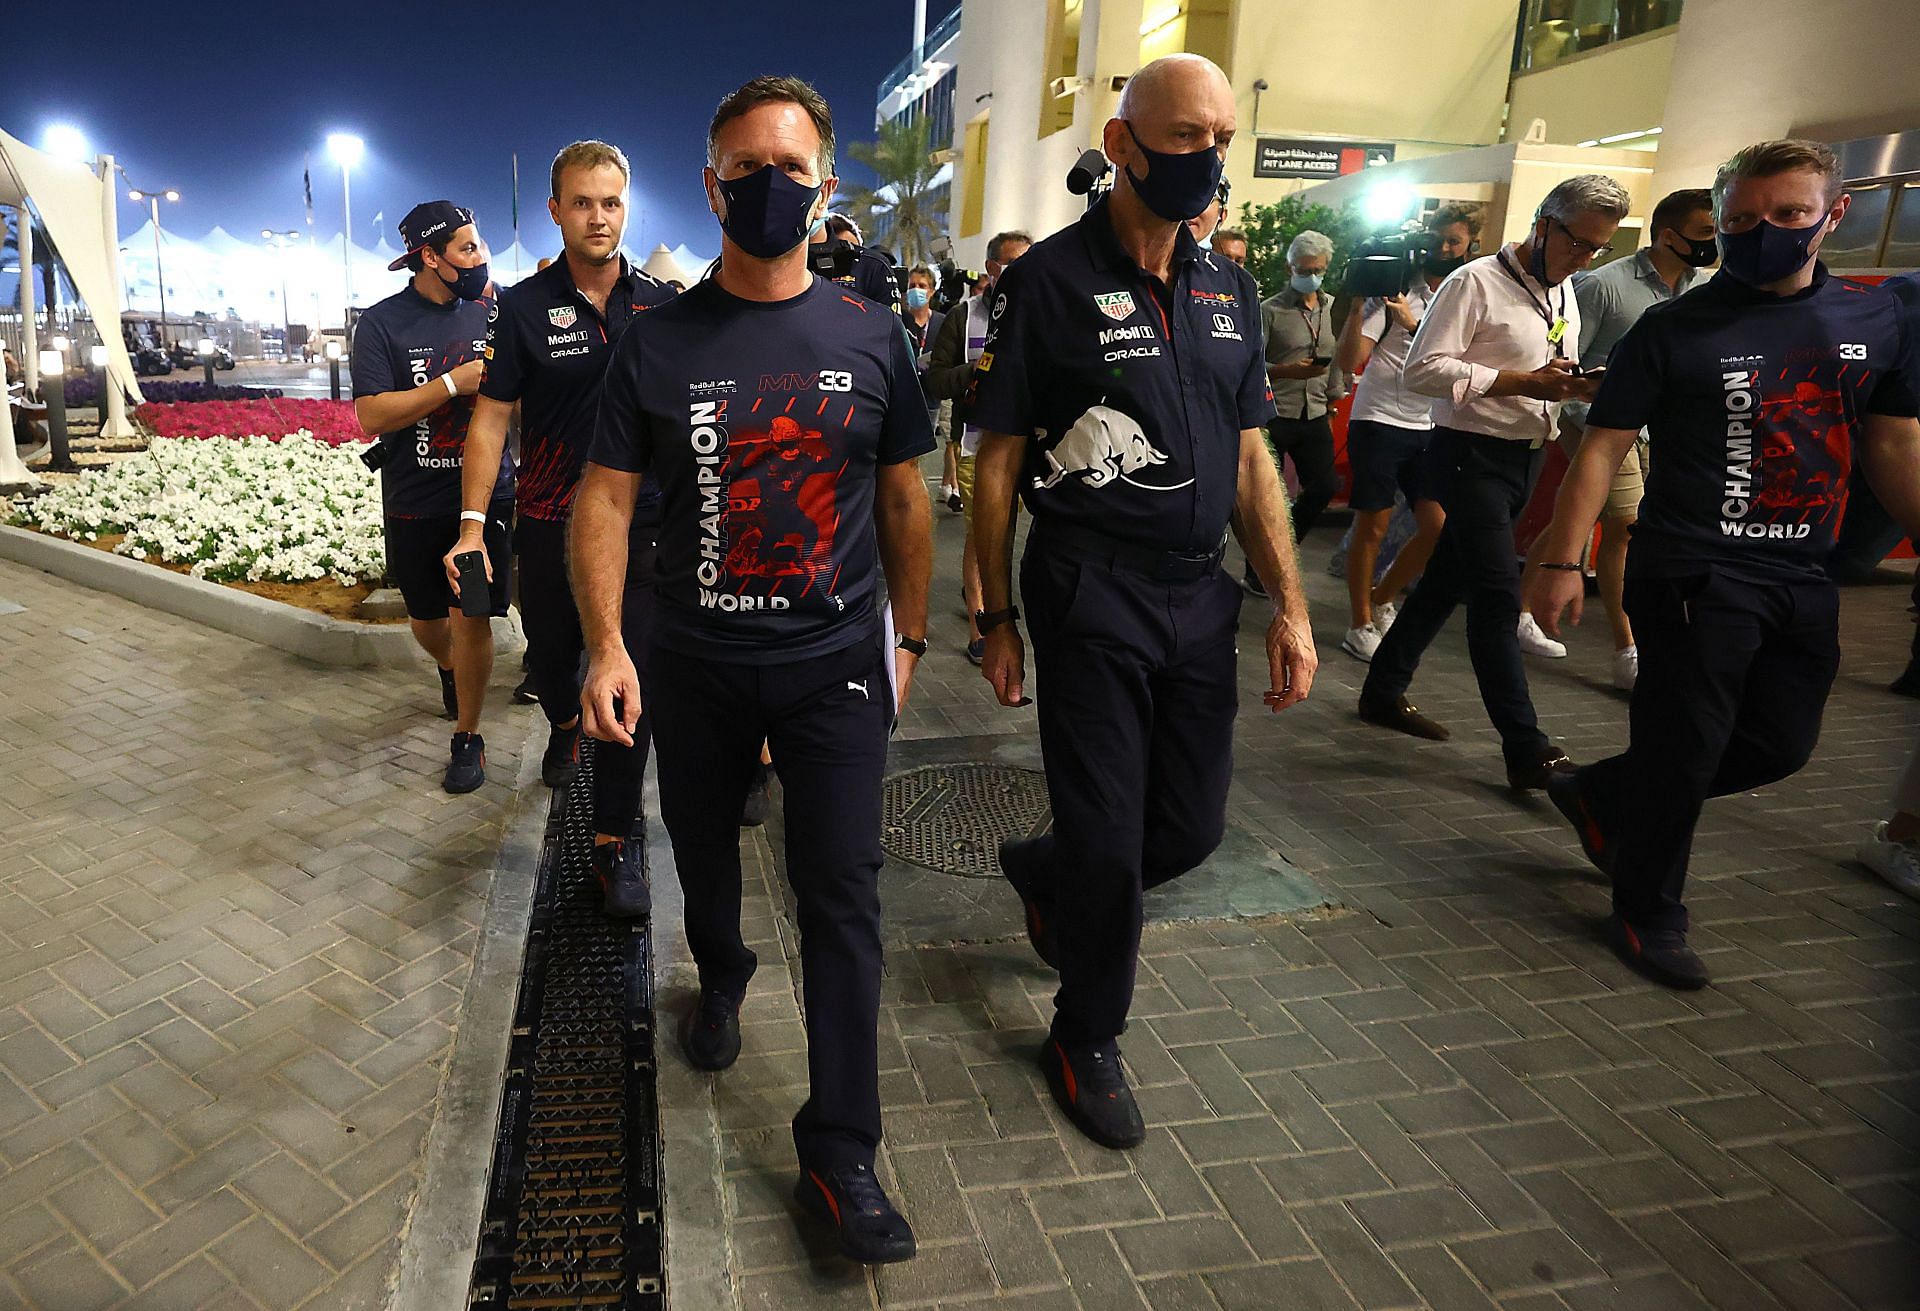 Red Bull Racing Team Principal Christian Horner and Adrian Newey, the Chief Technical Officer of Red Bull Racing walk from the FIA Stewards Office after the hearing for the appeal after the 2021 Abu Dhabi Grand Prix. (Photo by Clive Rose/Getty Images)